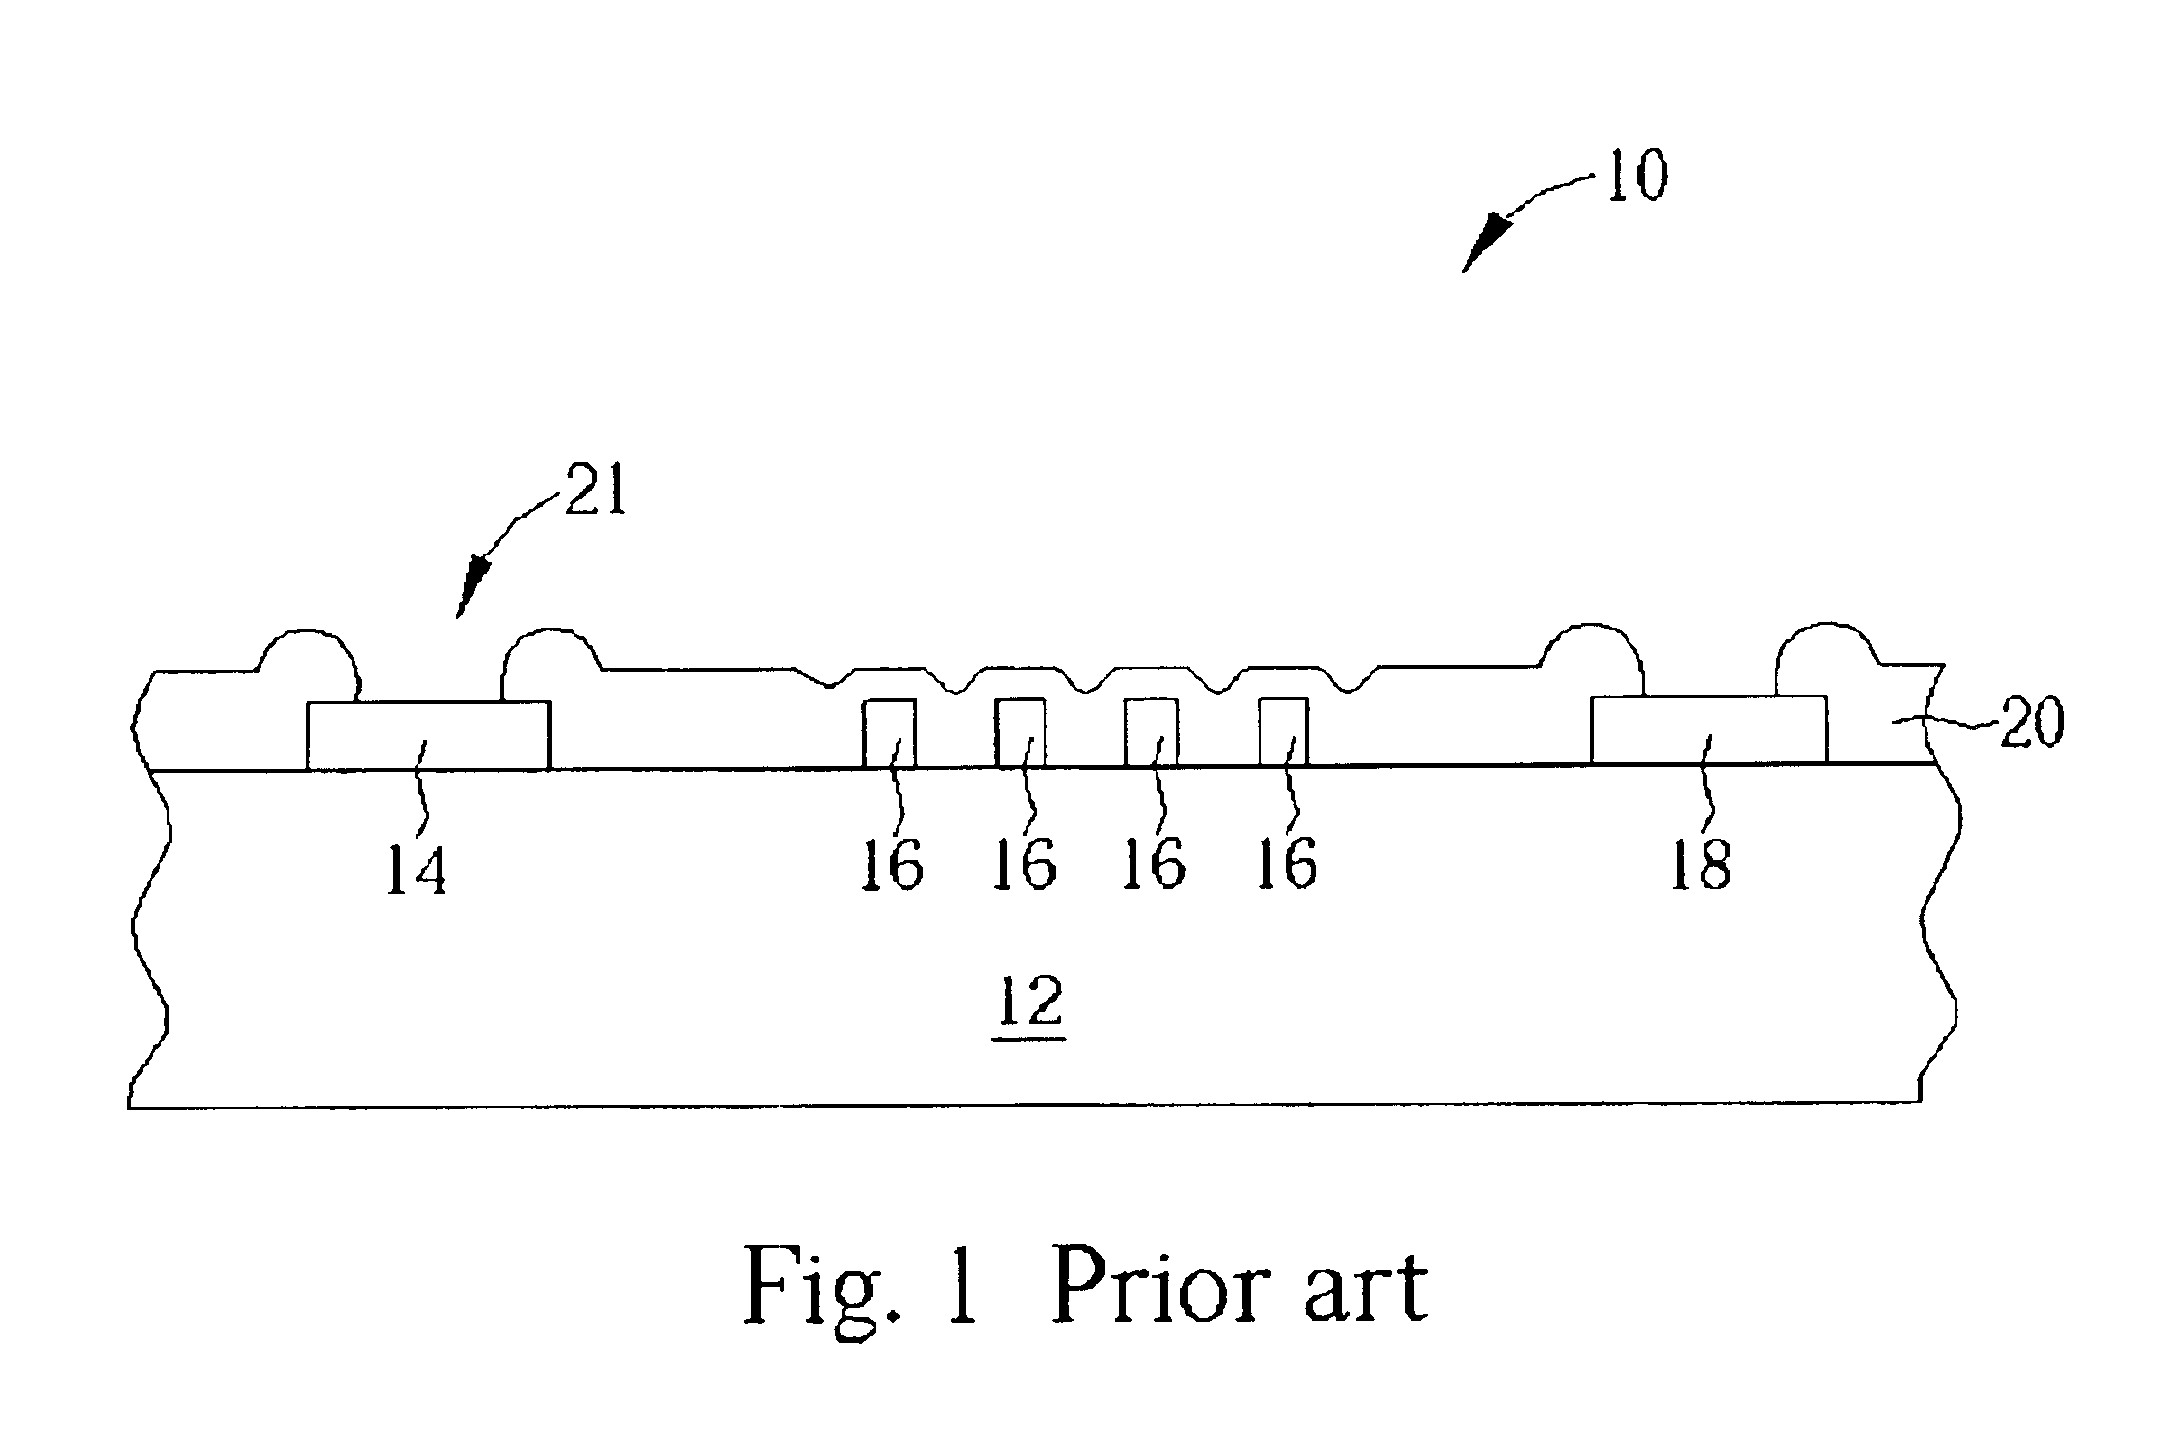 Solder bump structure and laser repair process for memory device